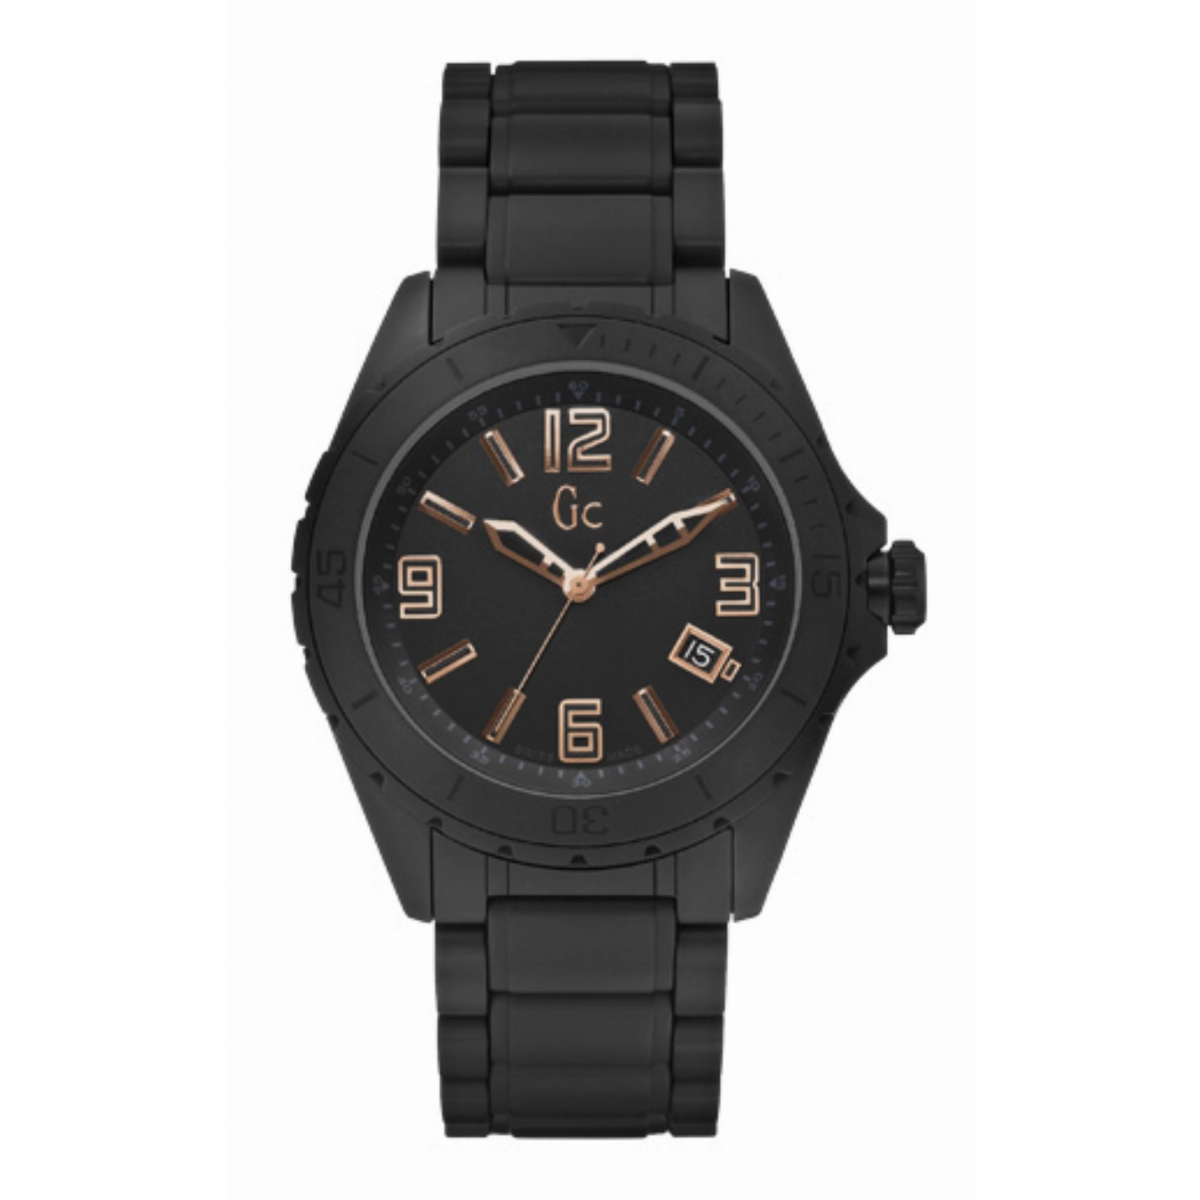 WATCH ANALOG MENS GUESS X85003G2S Gc